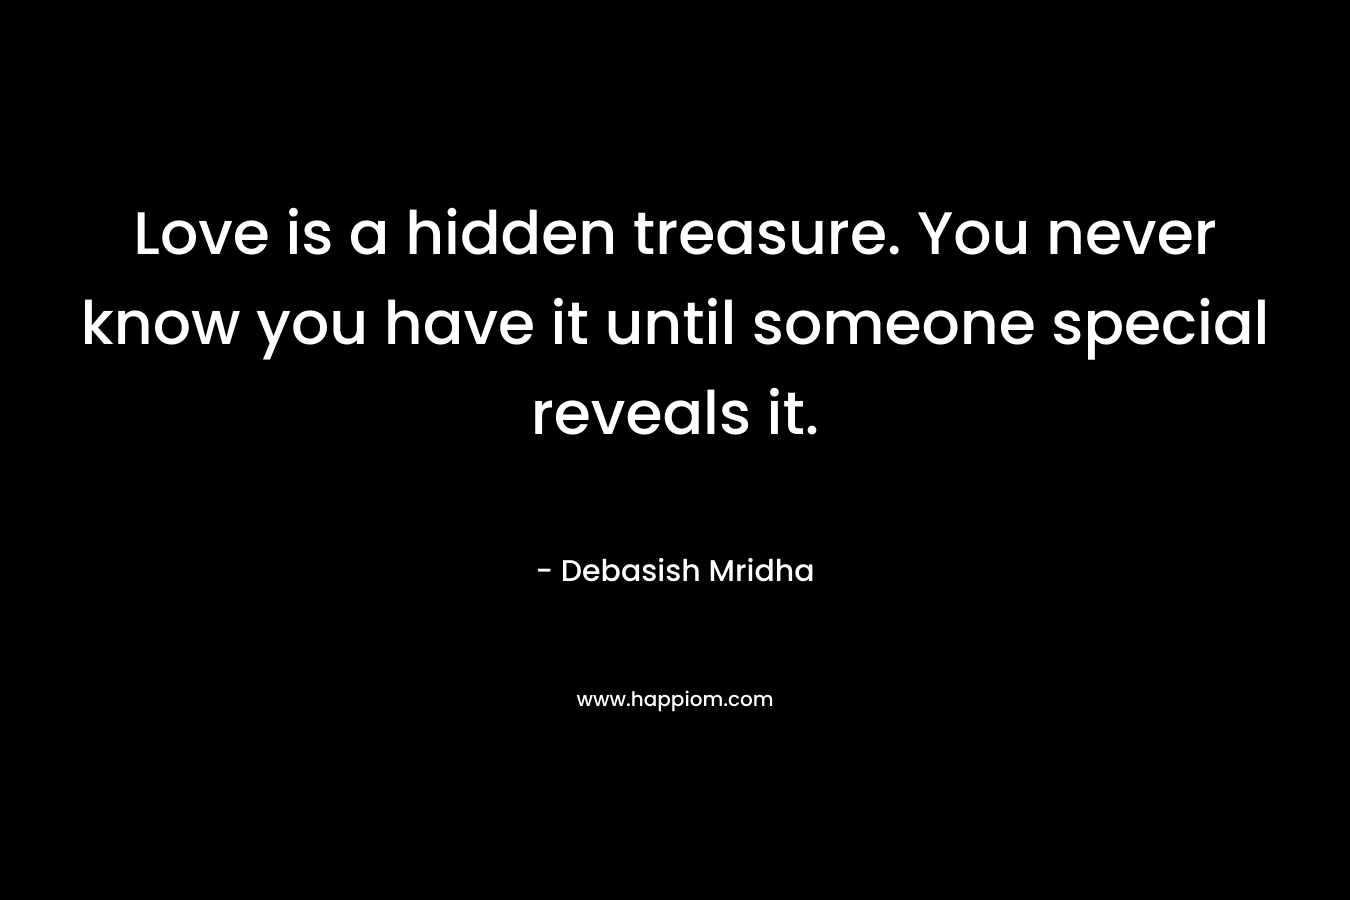 Love is a hidden treasure. You never know you have it until someone special reveals it.